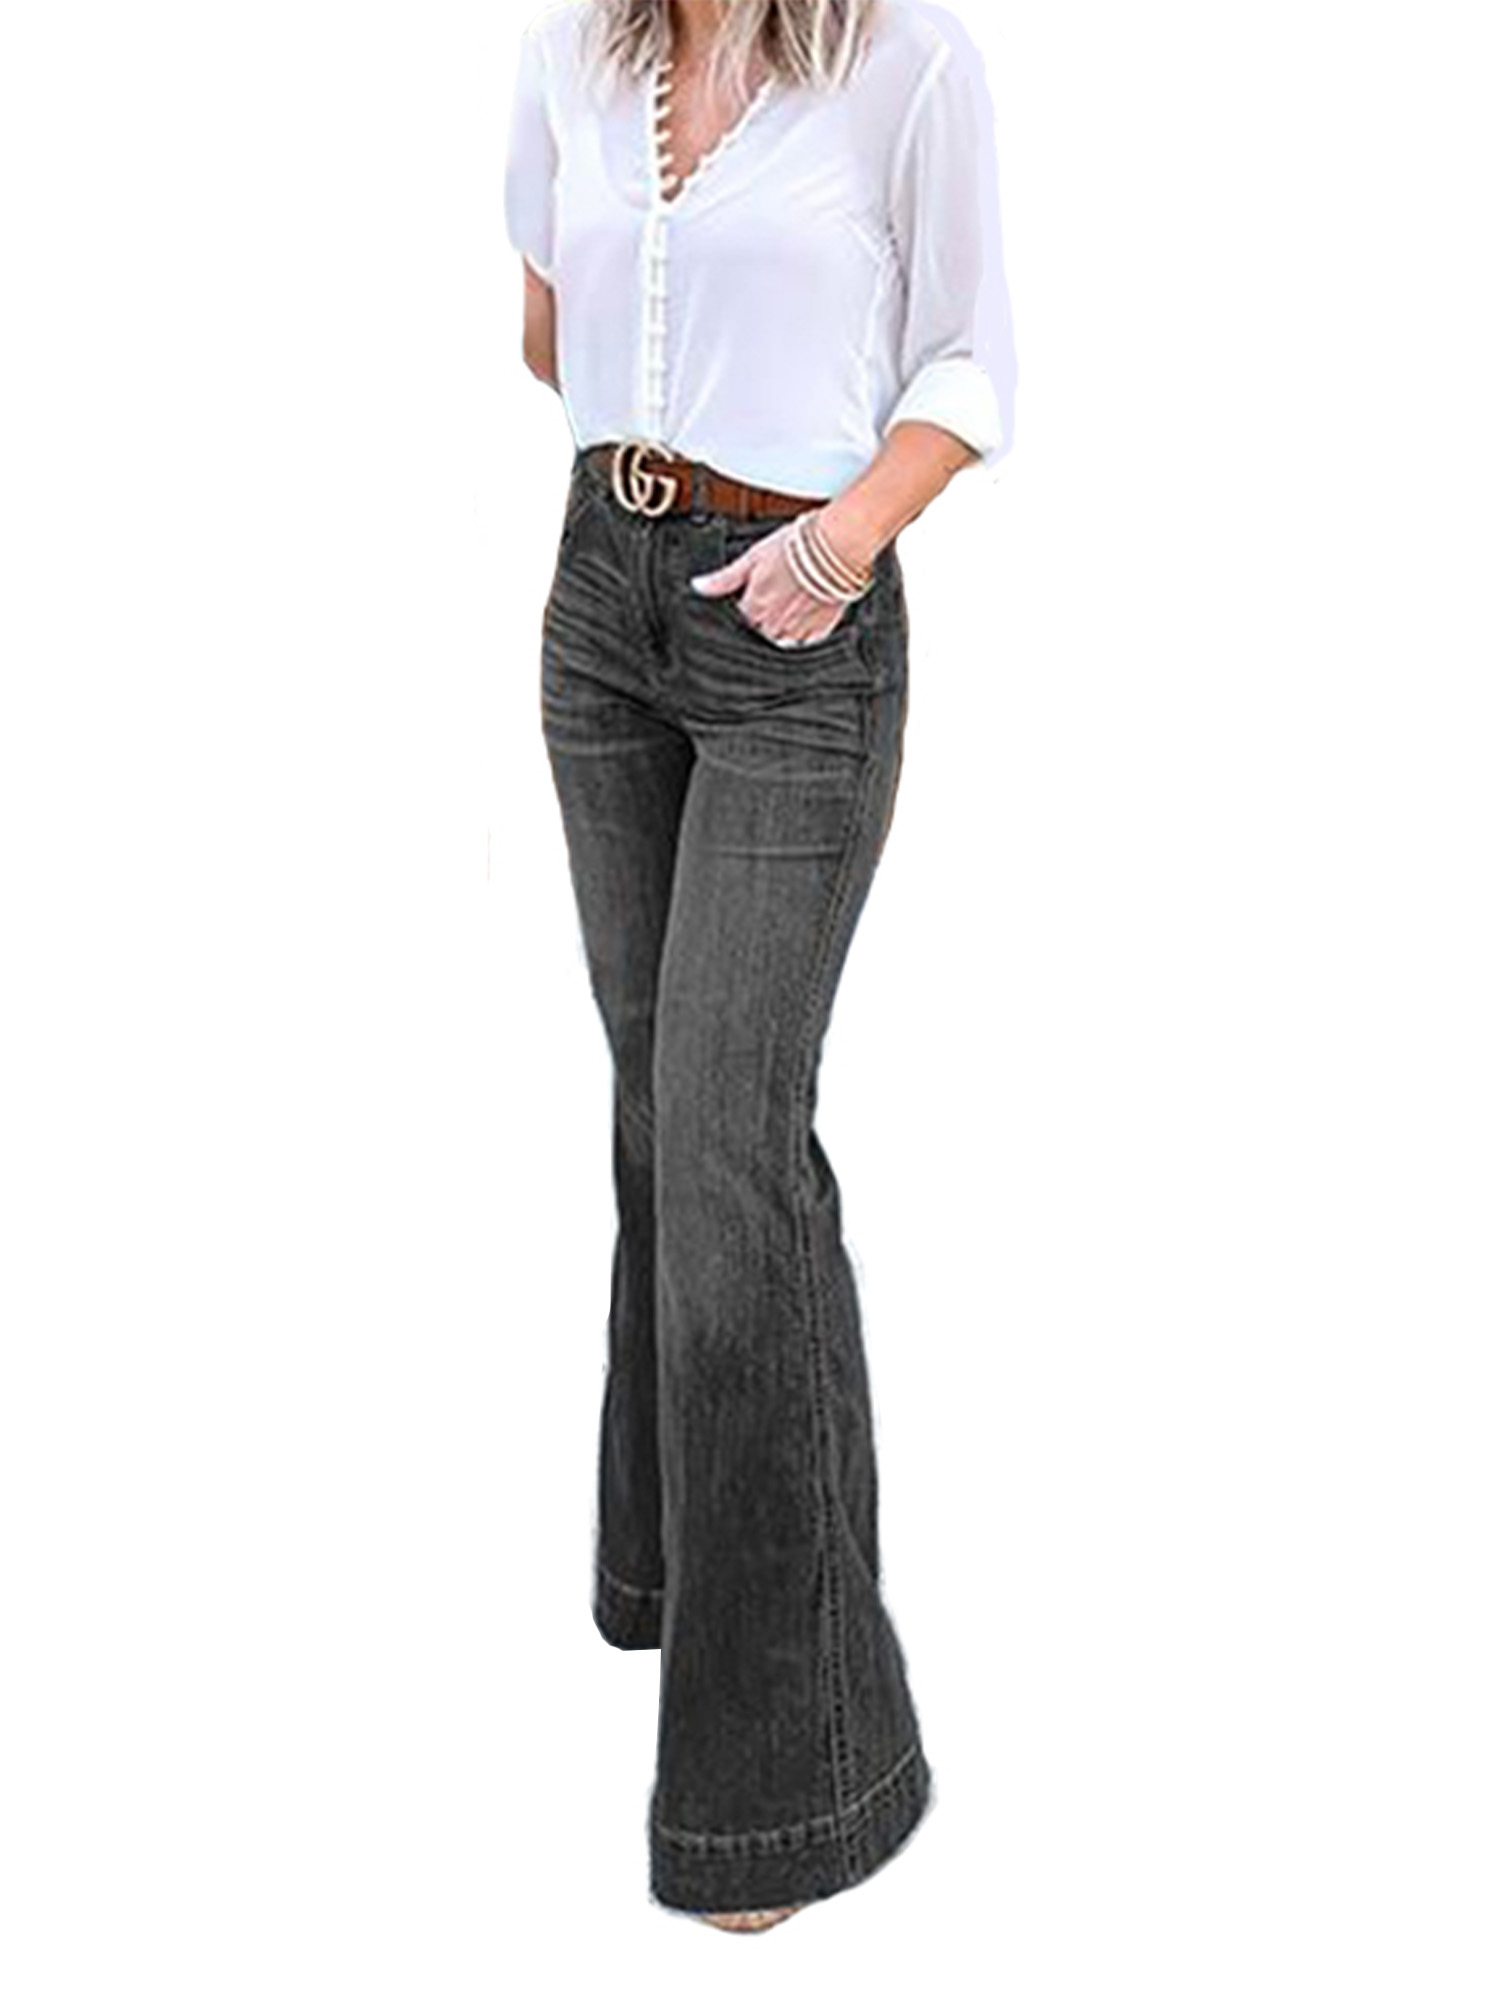 Avamo Retro Flared Jeans For Women Distressed Jeans Ladies Bell Bottoms Jeans Stretch Bootcut Denim Pants Casual Wide Leg Trousers - image 1 of 2